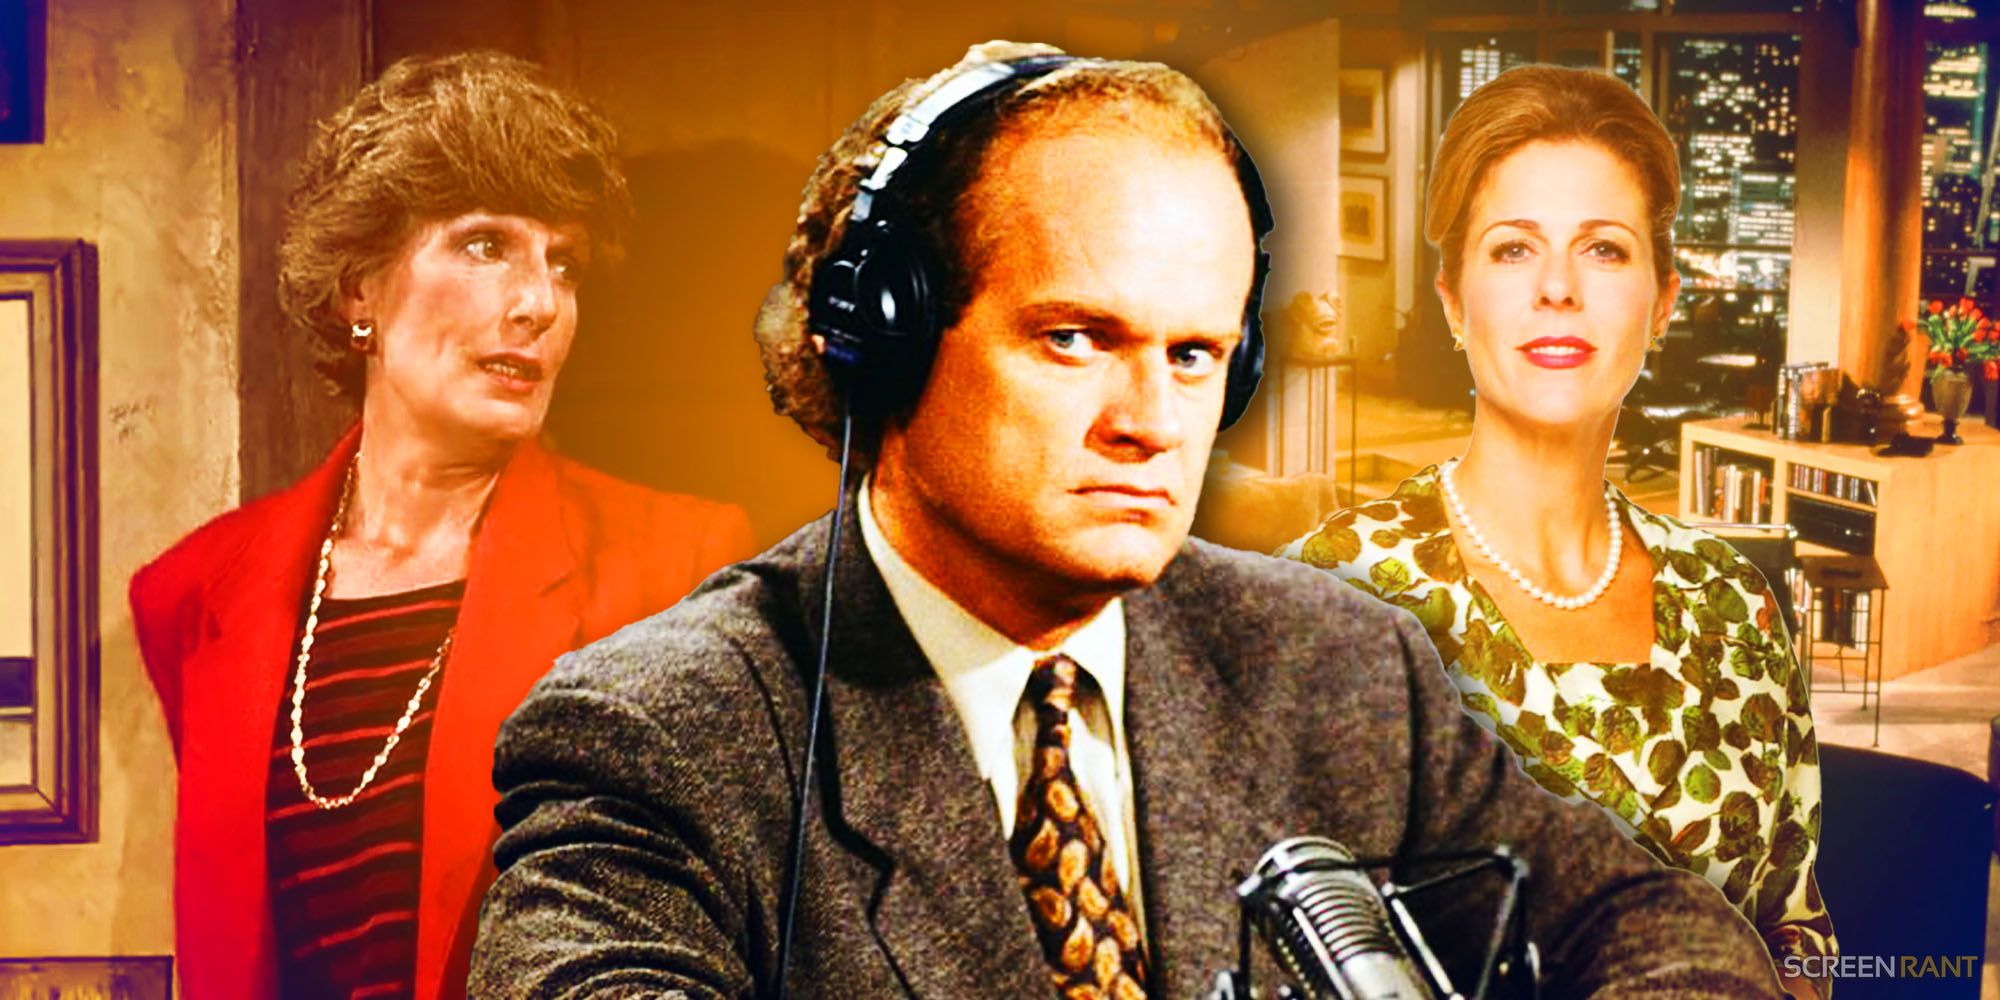 New Frasier Reveal Makes Cheers’ Absence More Baffling (& Means Season 2 Cameos Should Happen)